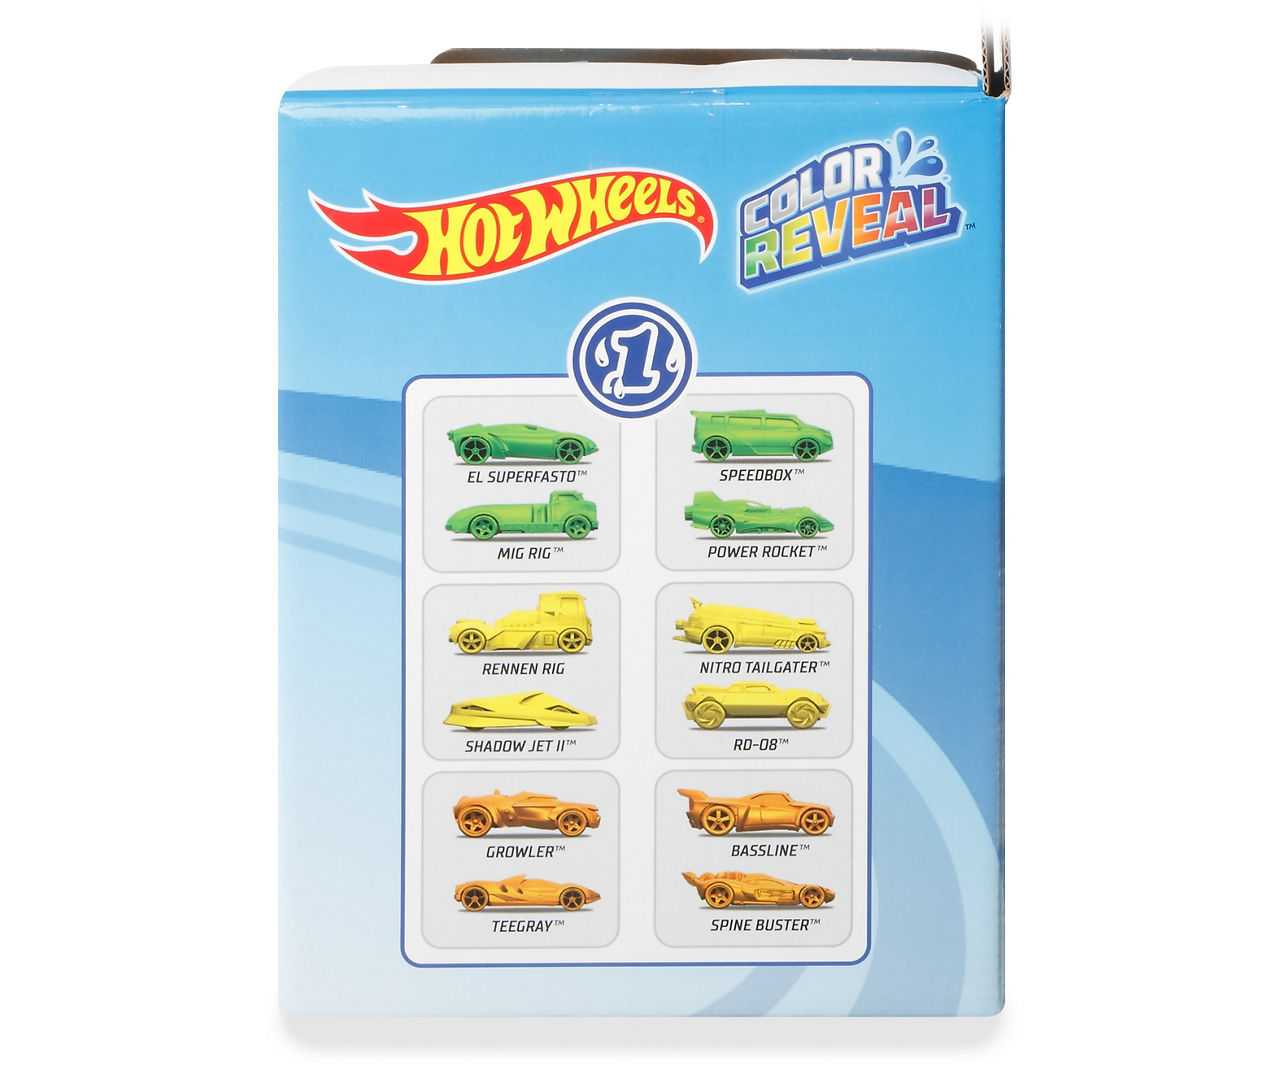 Hot Wheels Color Reveal toy vehicle - The Toy Box Hanover